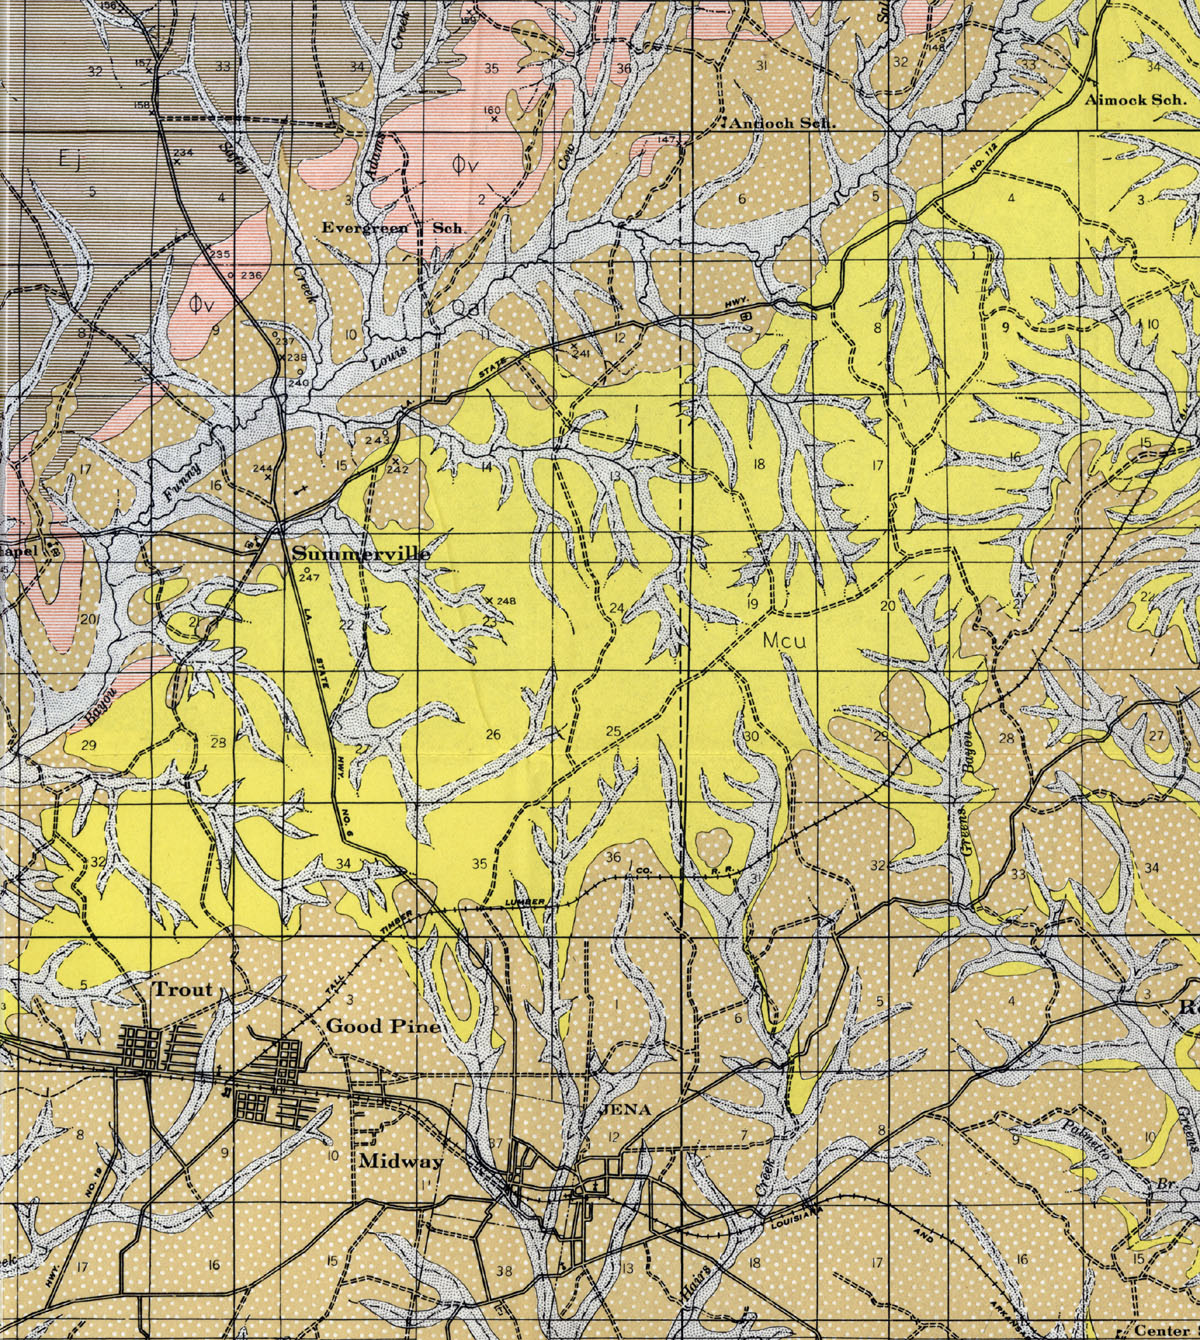 Tall Timber Lumber Company (La.), map showing tram route northwest of Trout and Goodpine, La. in 1938.